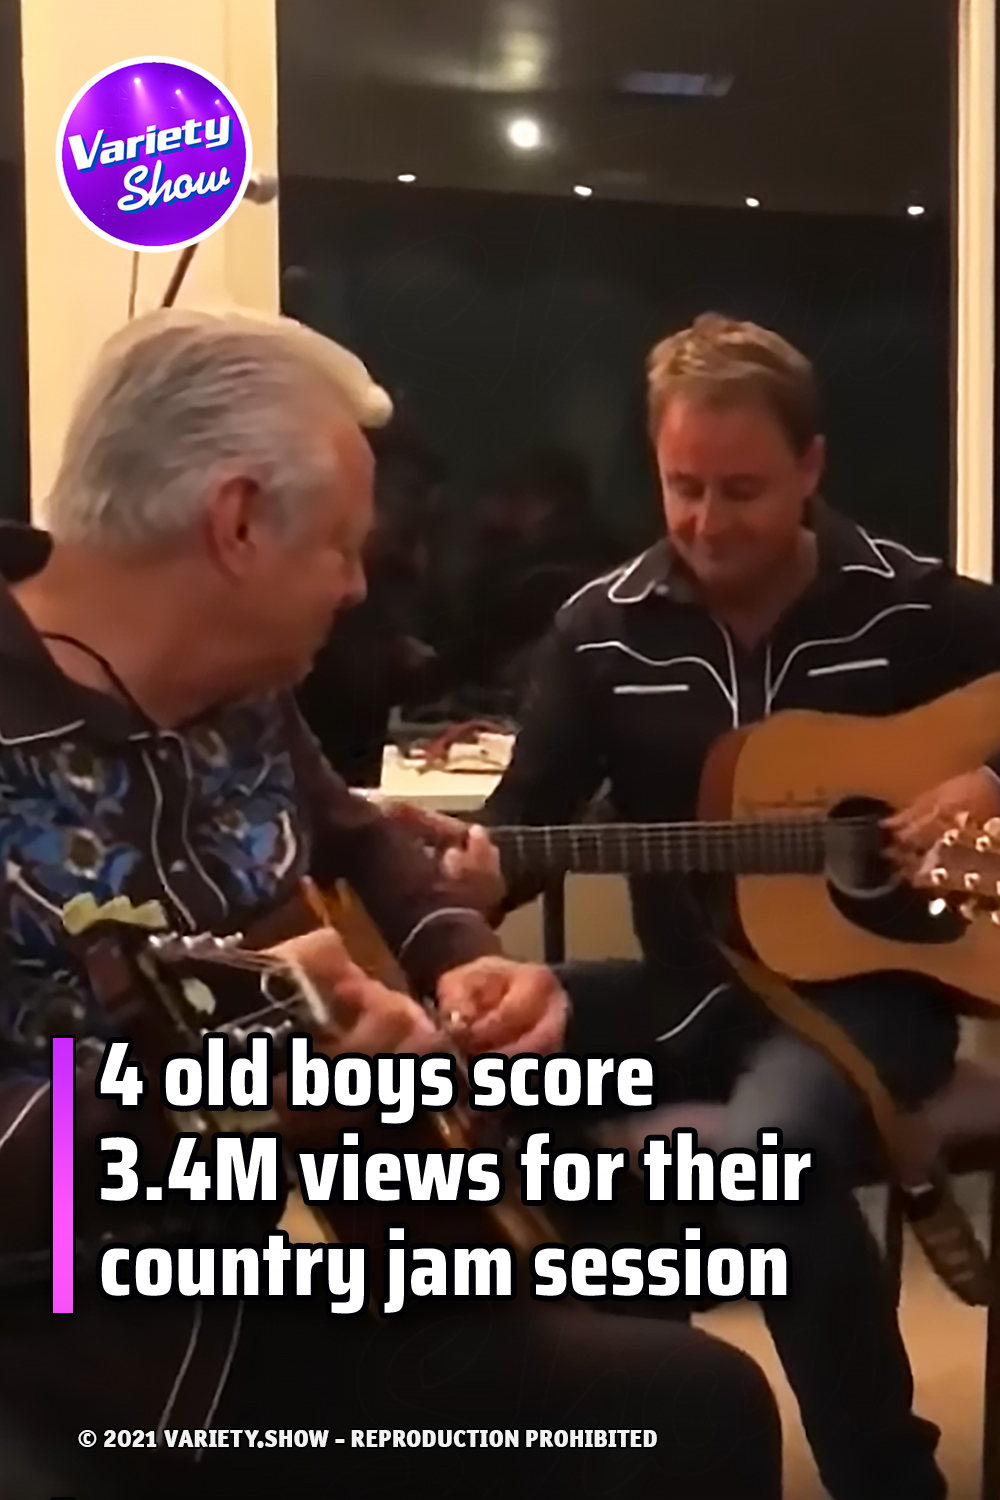 4 old boys score 3.4M views for their country jam session